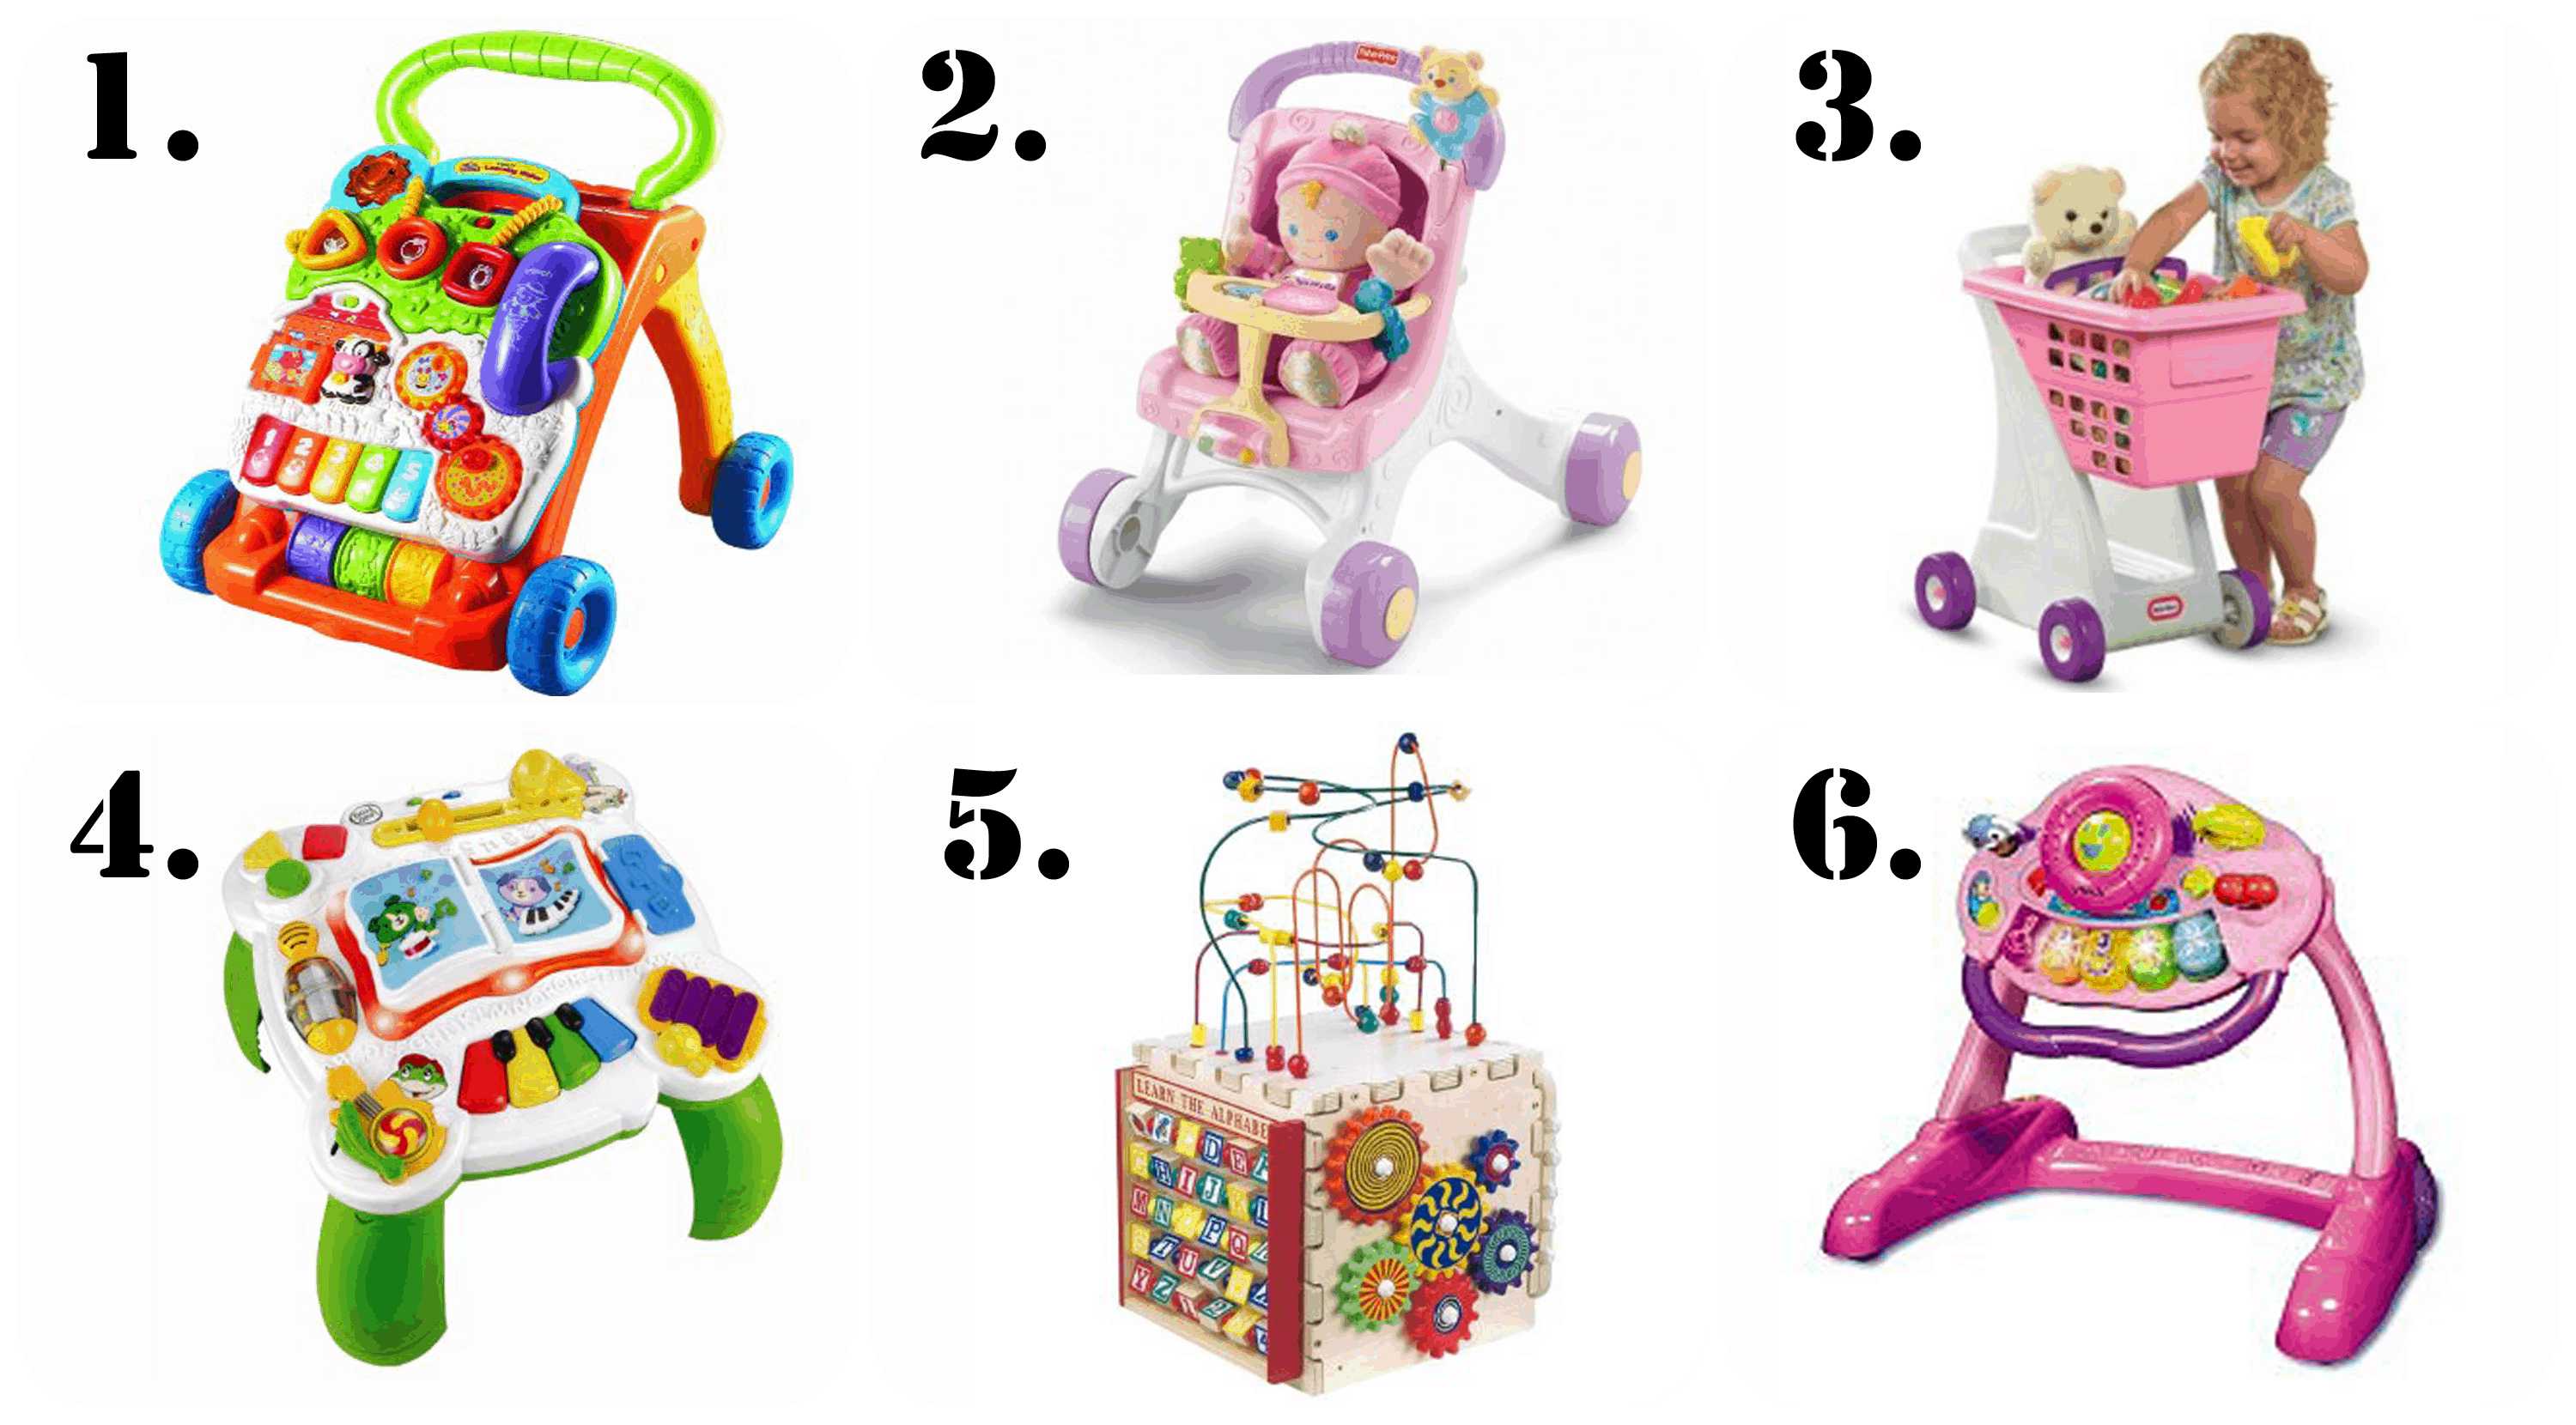 The Ultimate List of Gift Ideas for a 1 Year Old Girl